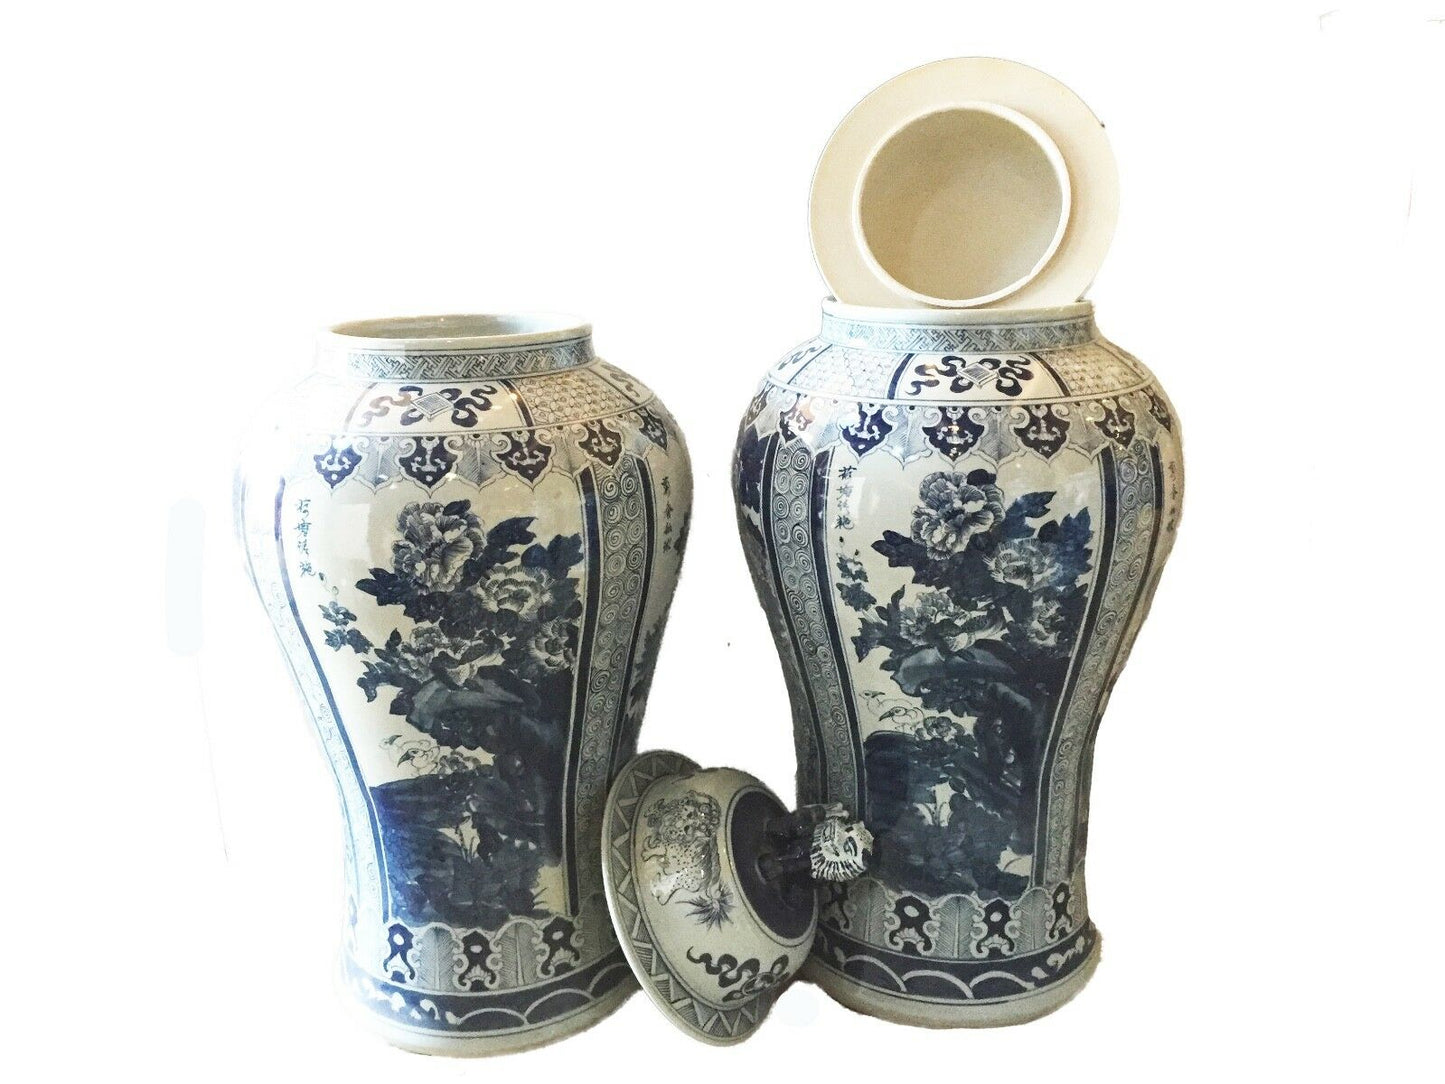 #929 Mansion Size Chinoiserie B & W Porcelain Ginger Jars - a Pair 47" H